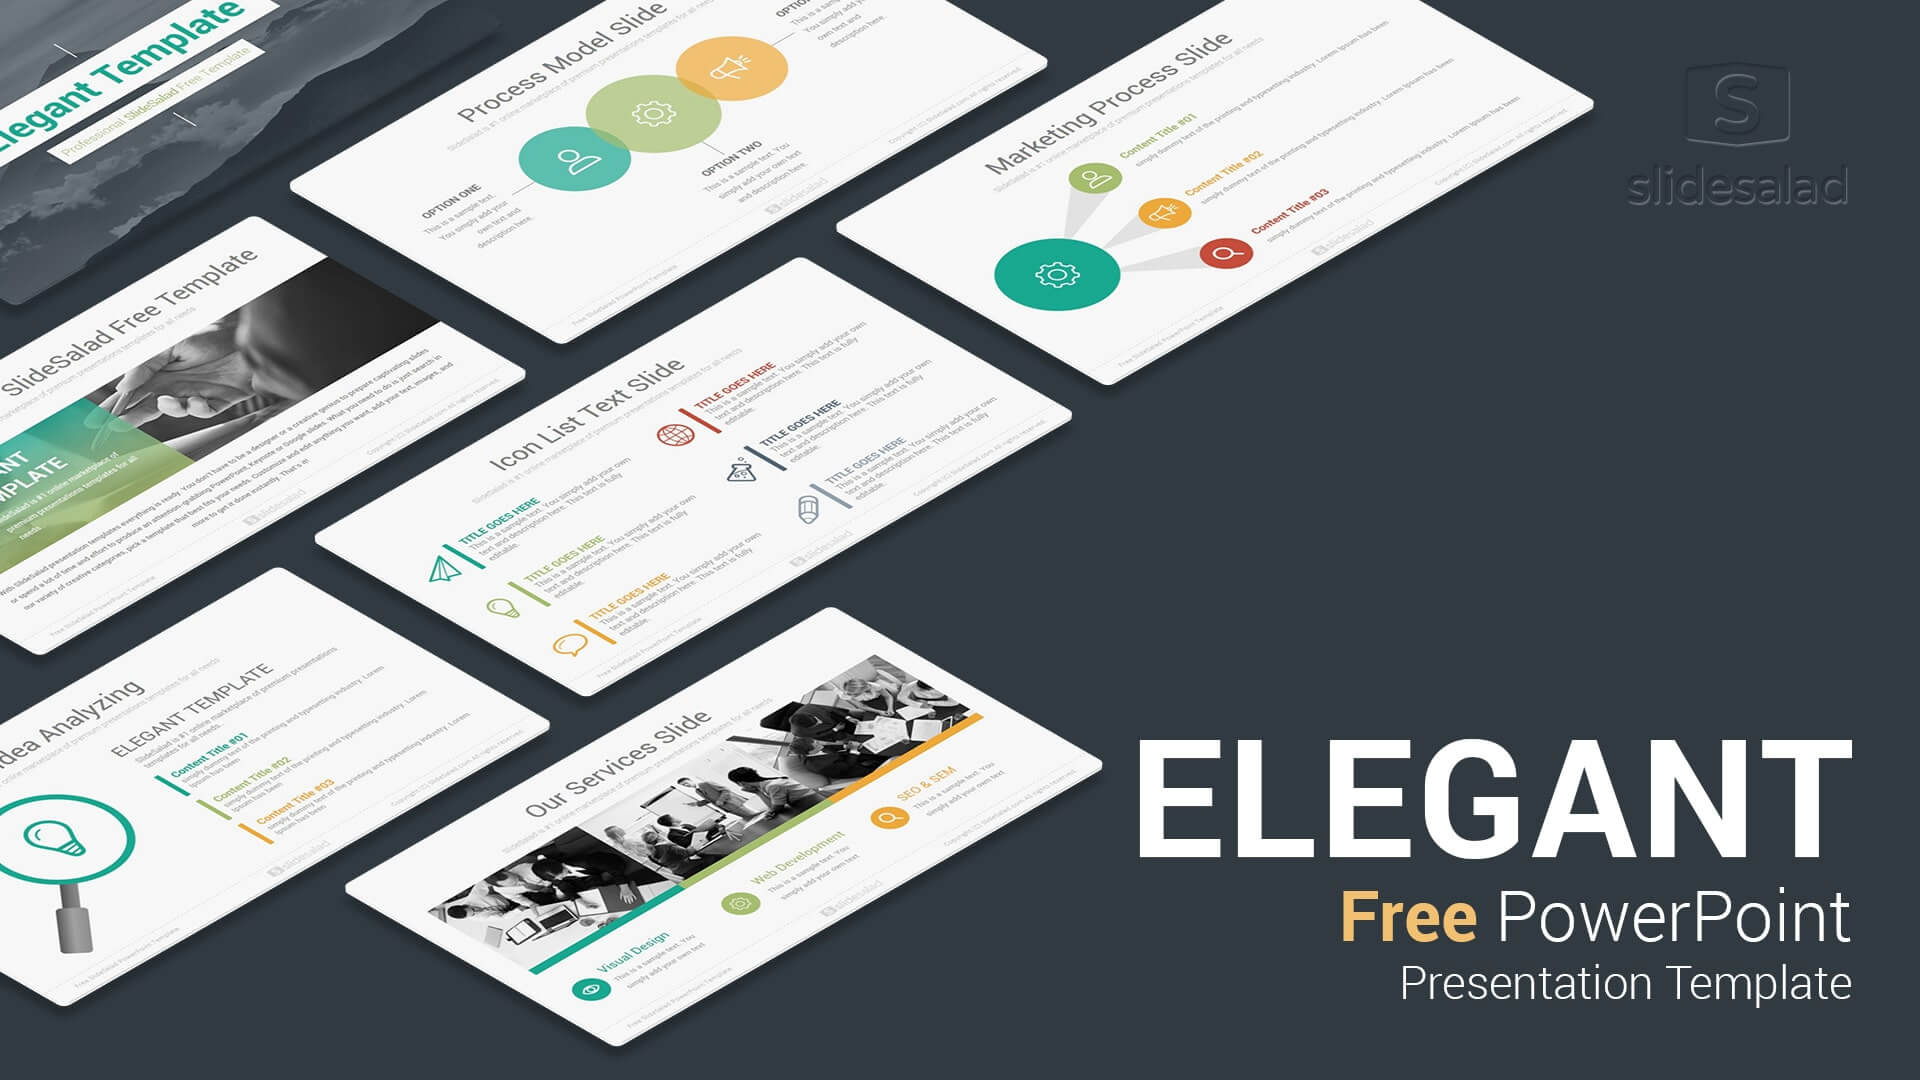 Elegant Free Download Powerpoint Templates For Presentation Intended For Free Powerpoint Presentation Templates Downloads